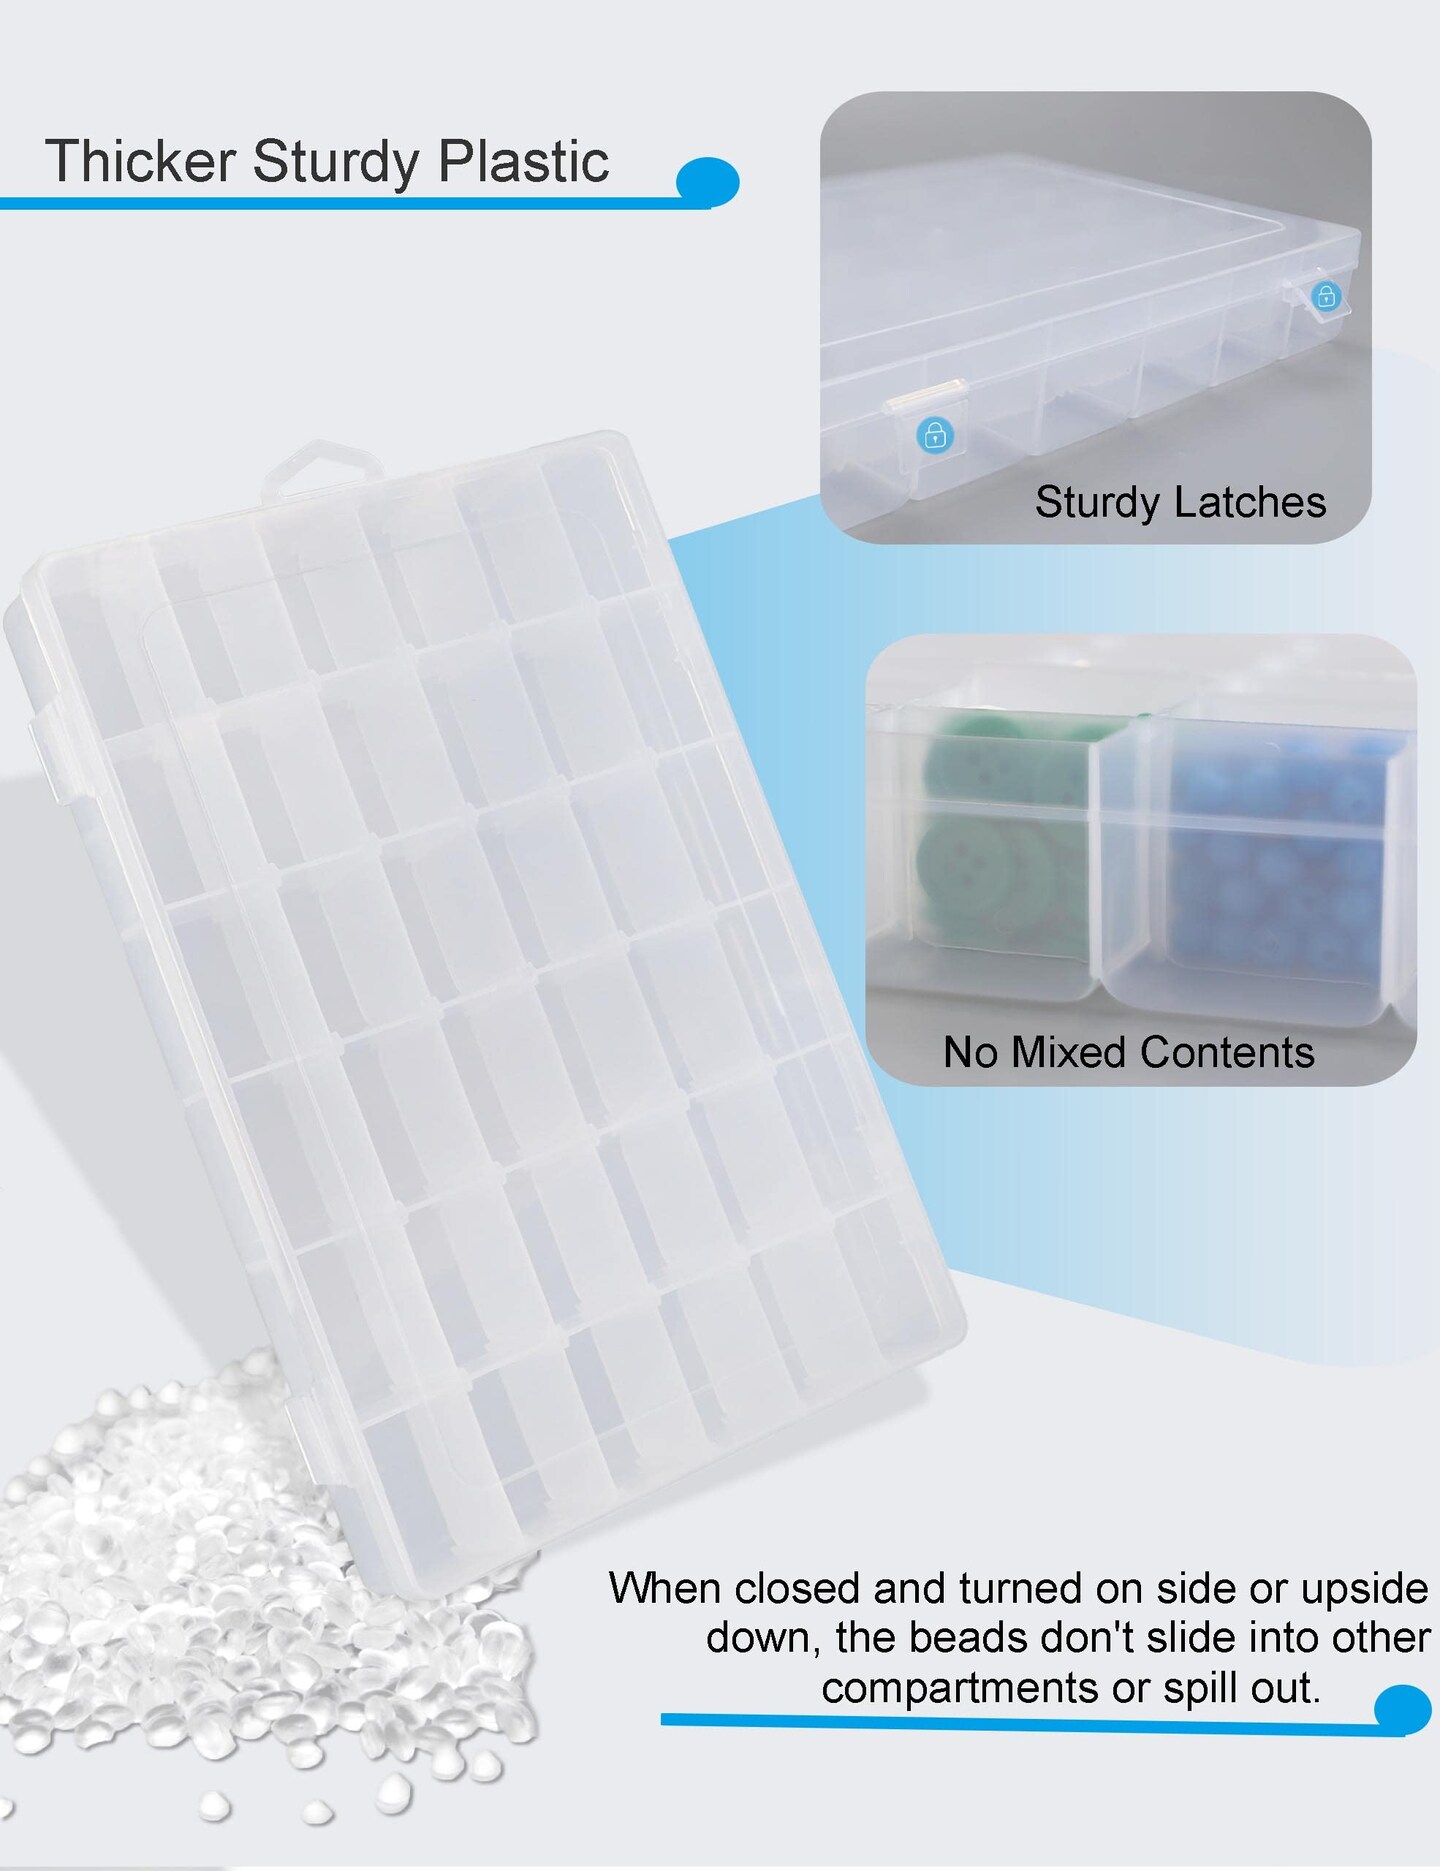 Hlotmeky Bead Organizer 36 Grids 4 Pack Clear Plastic Parts Organizer Box 3600 Tackle Box Craft Storage Compartment Divided Container